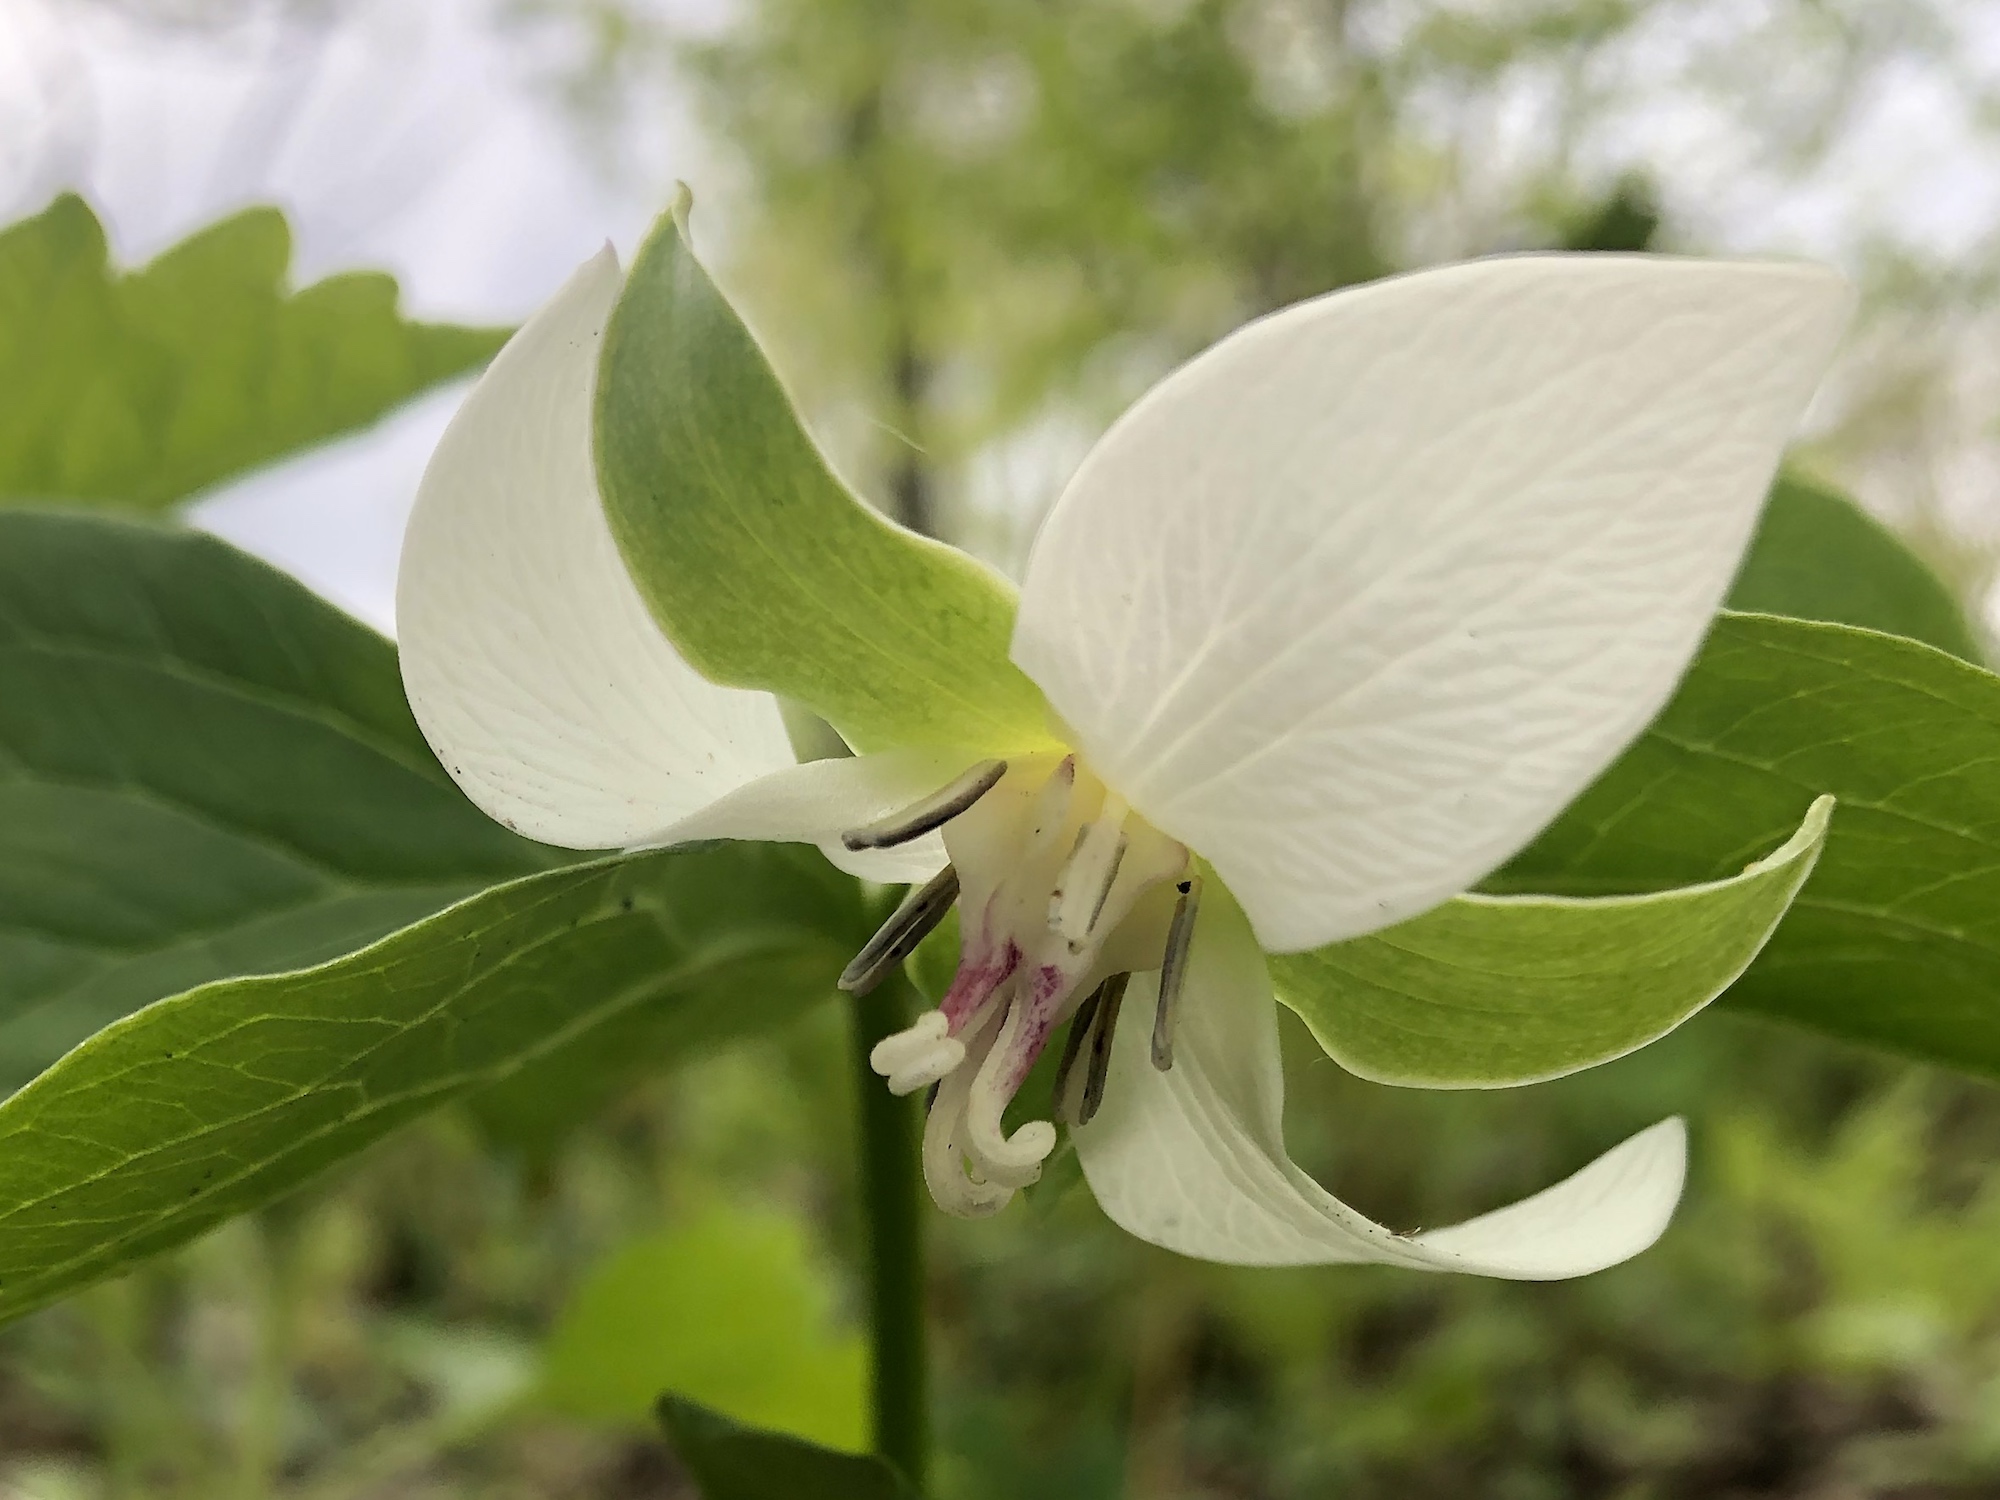 Drooping Trillium near Council Ring Spring in Madison, Wisconsin on May 10, 2021.